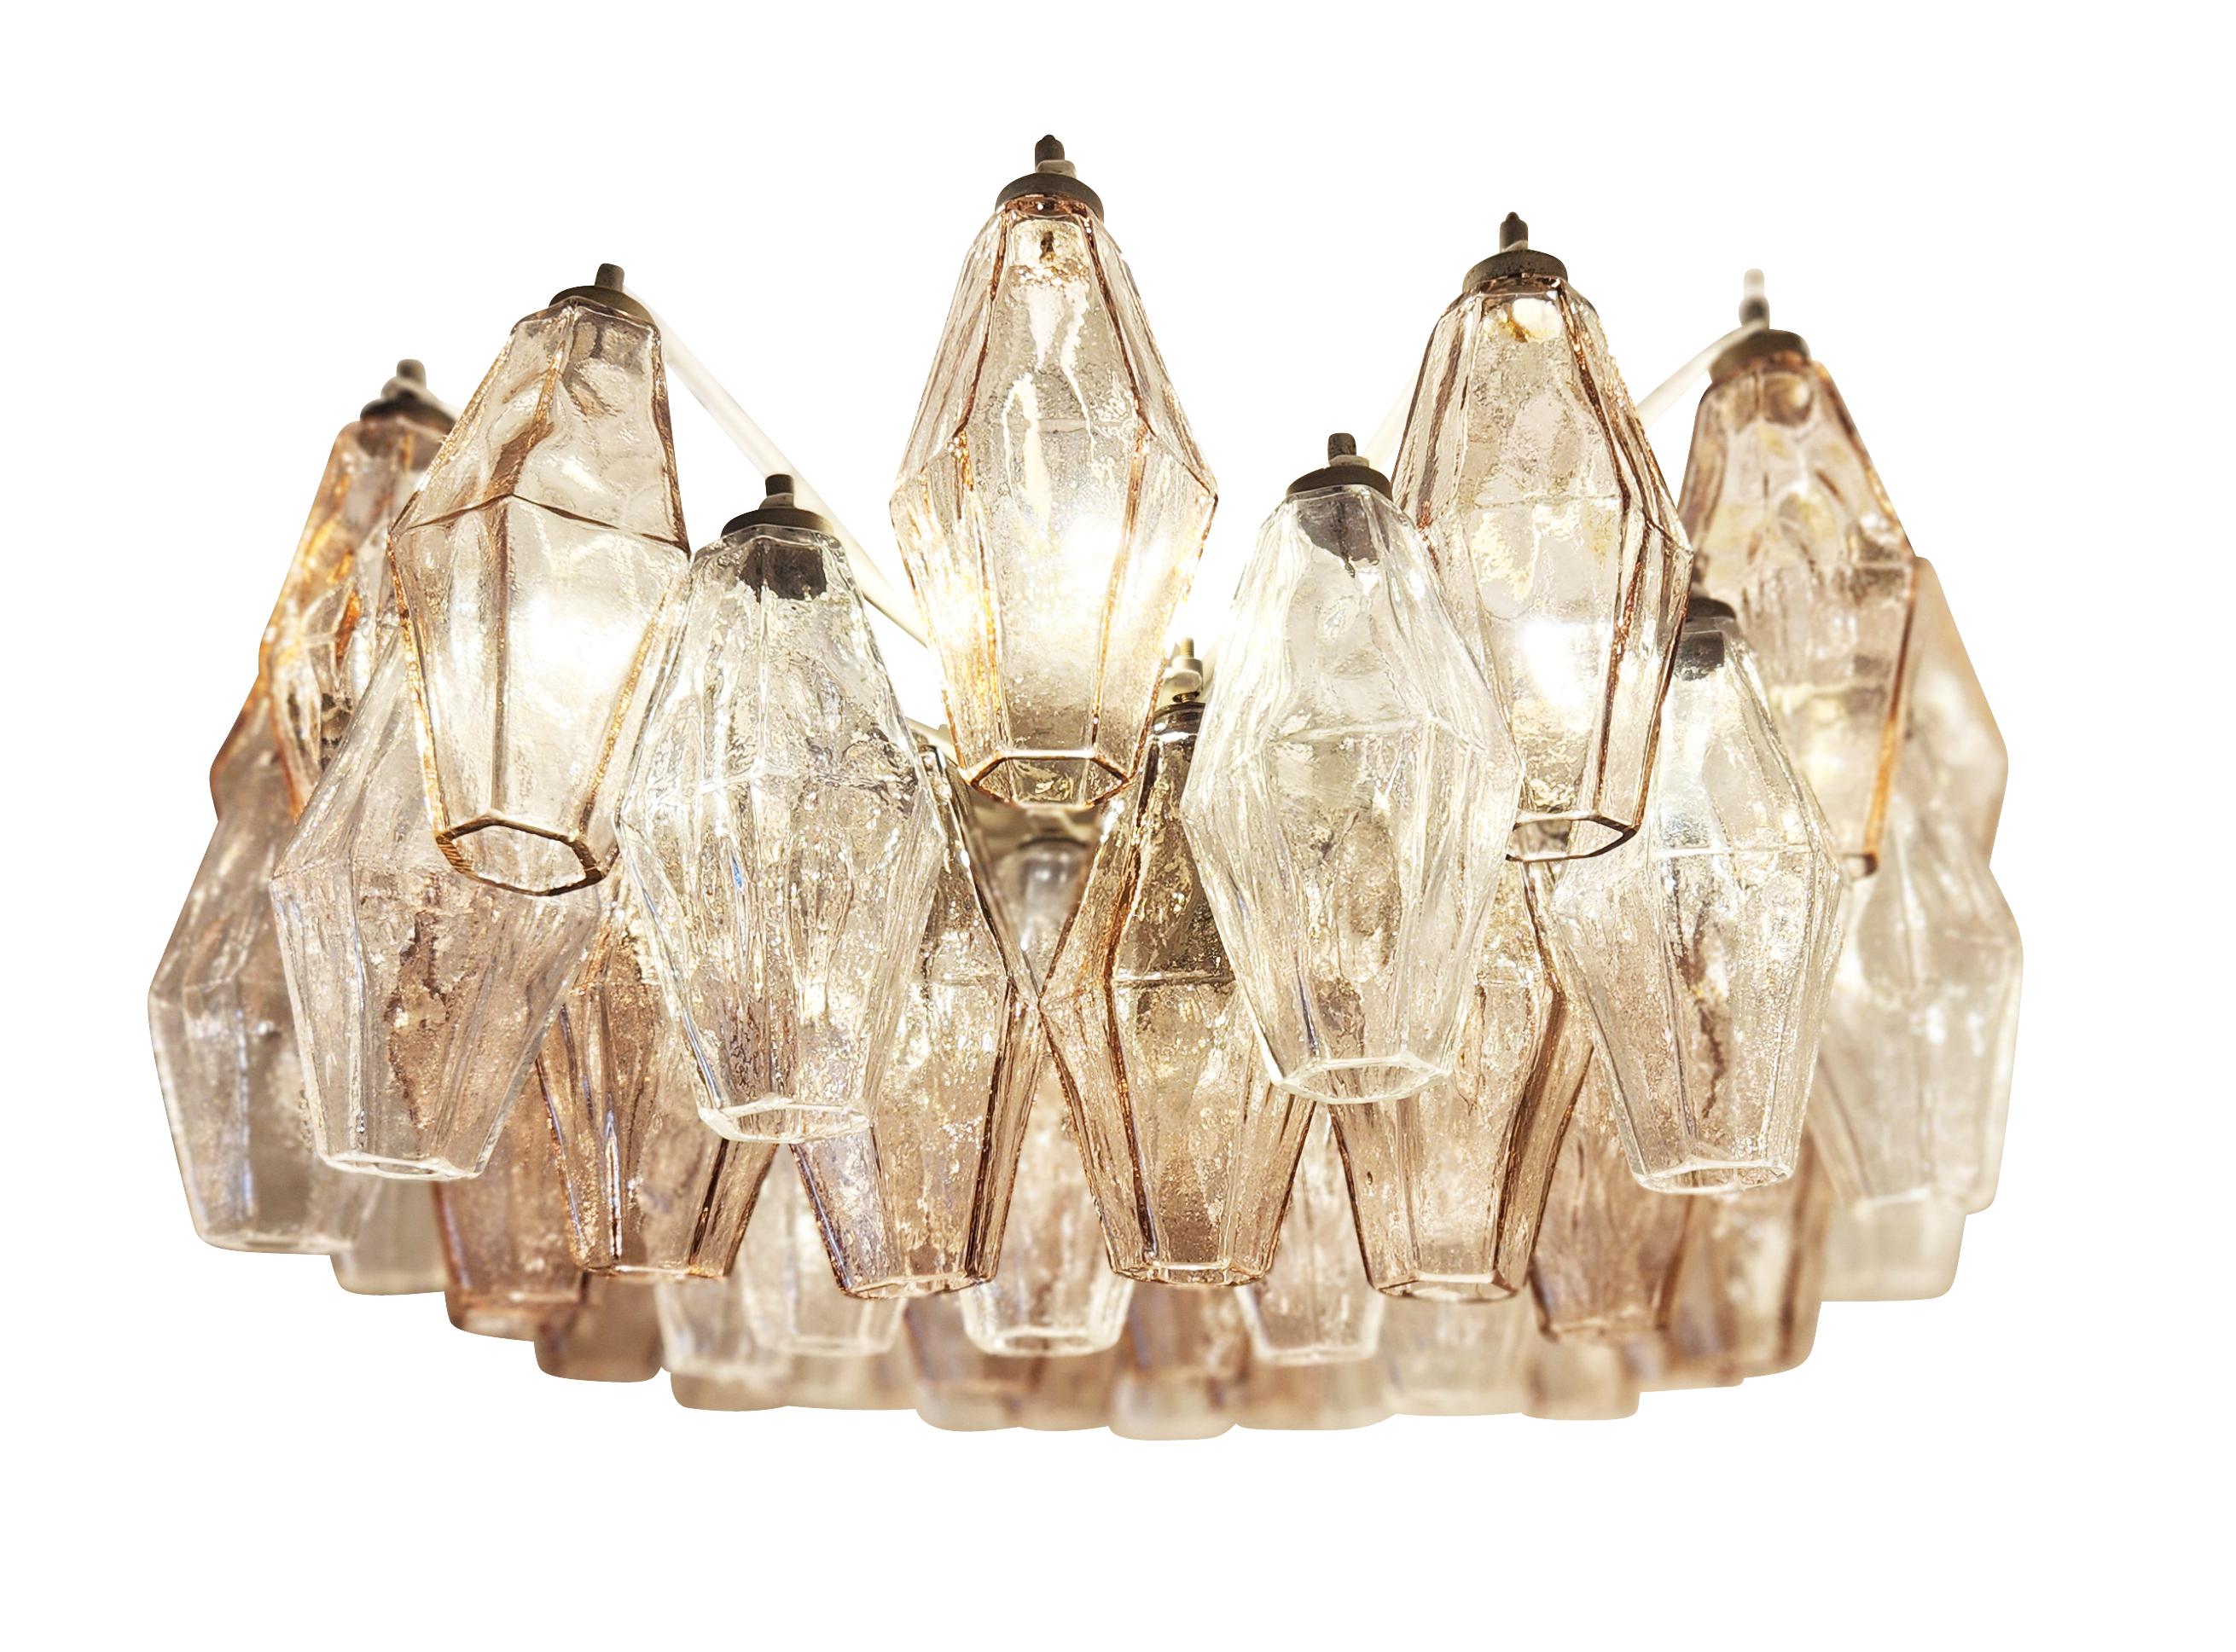 Mid-century chandeliers by Venini made with their iconic poliedri Murano glasses. The glasses are a mix of light rose and clear mounted on a white lacquered frame holding seven E12 candelabra bulbs each. Ready to hang on a chain. Price per